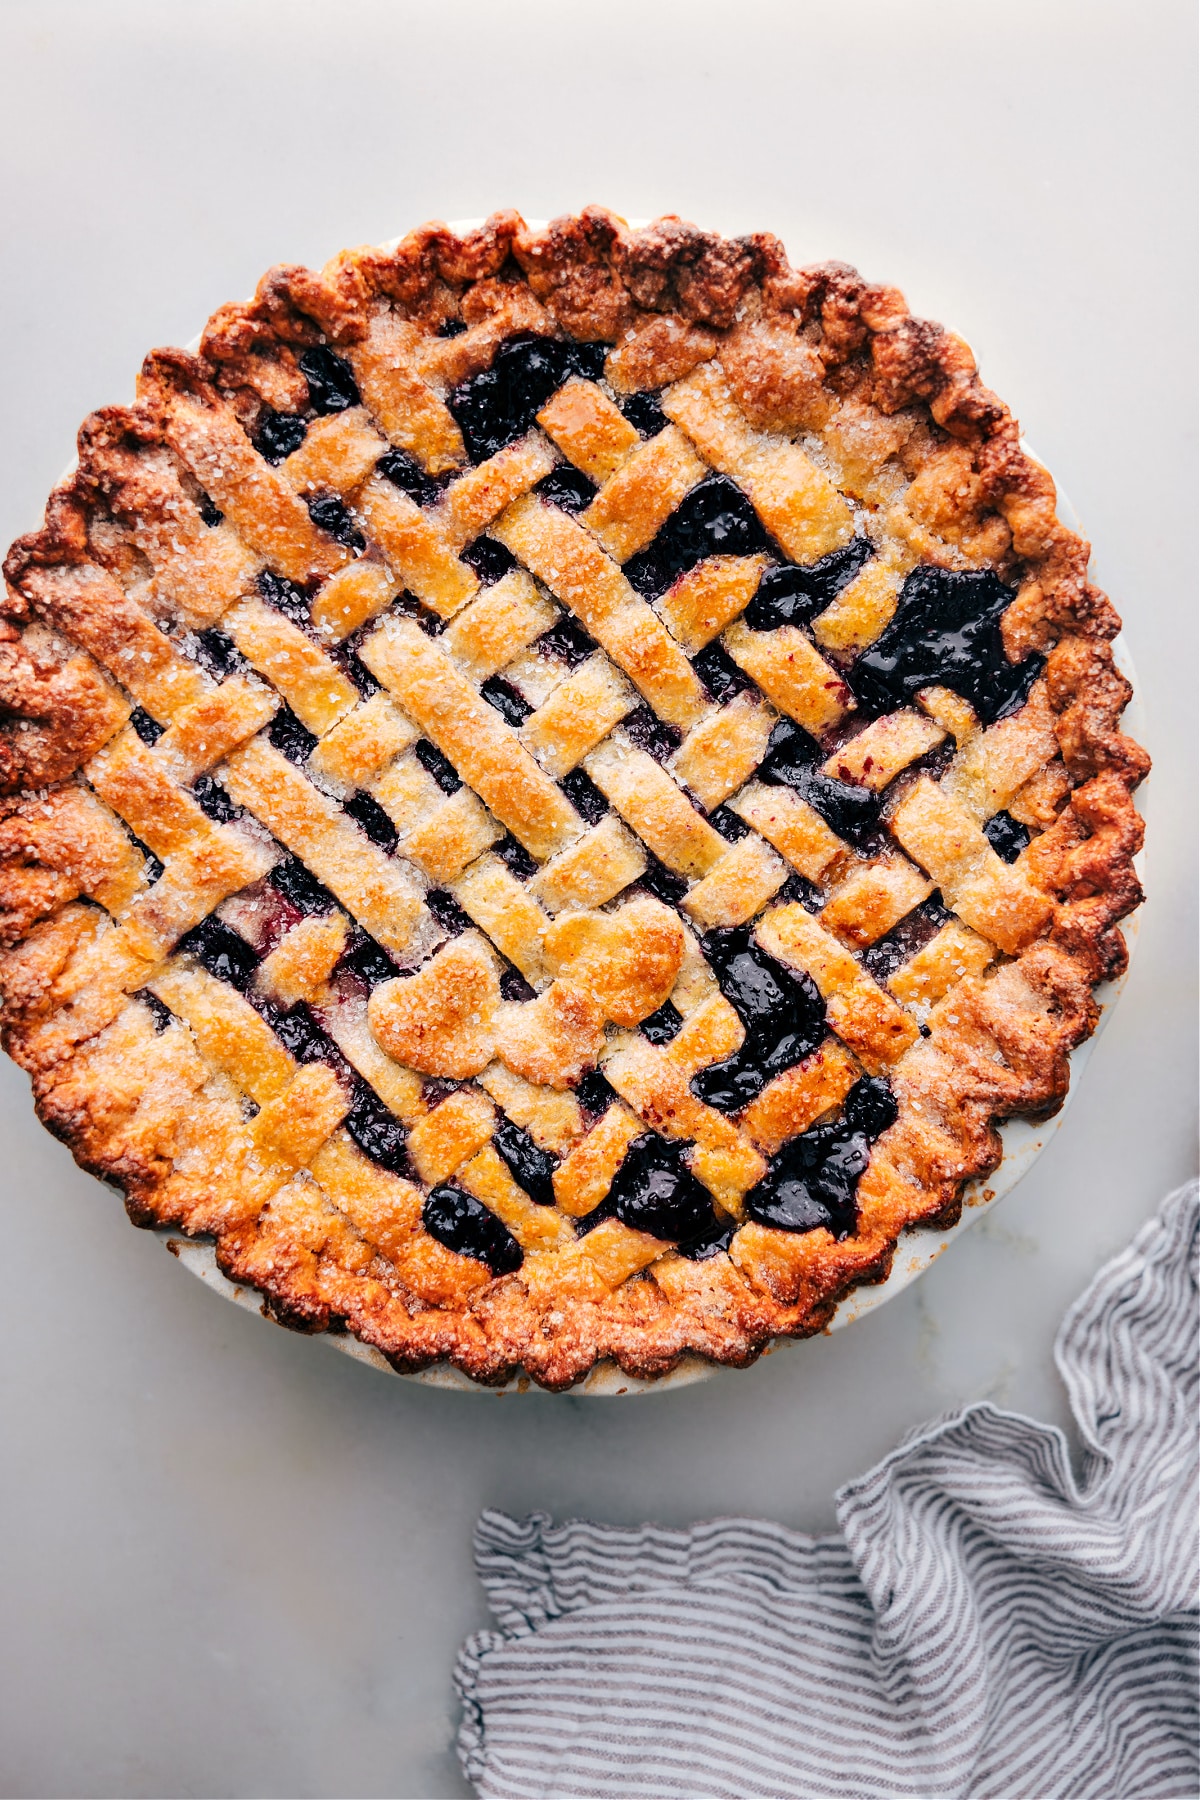 Delicious baked Berry Pie ready to be sliced and enjoyed.